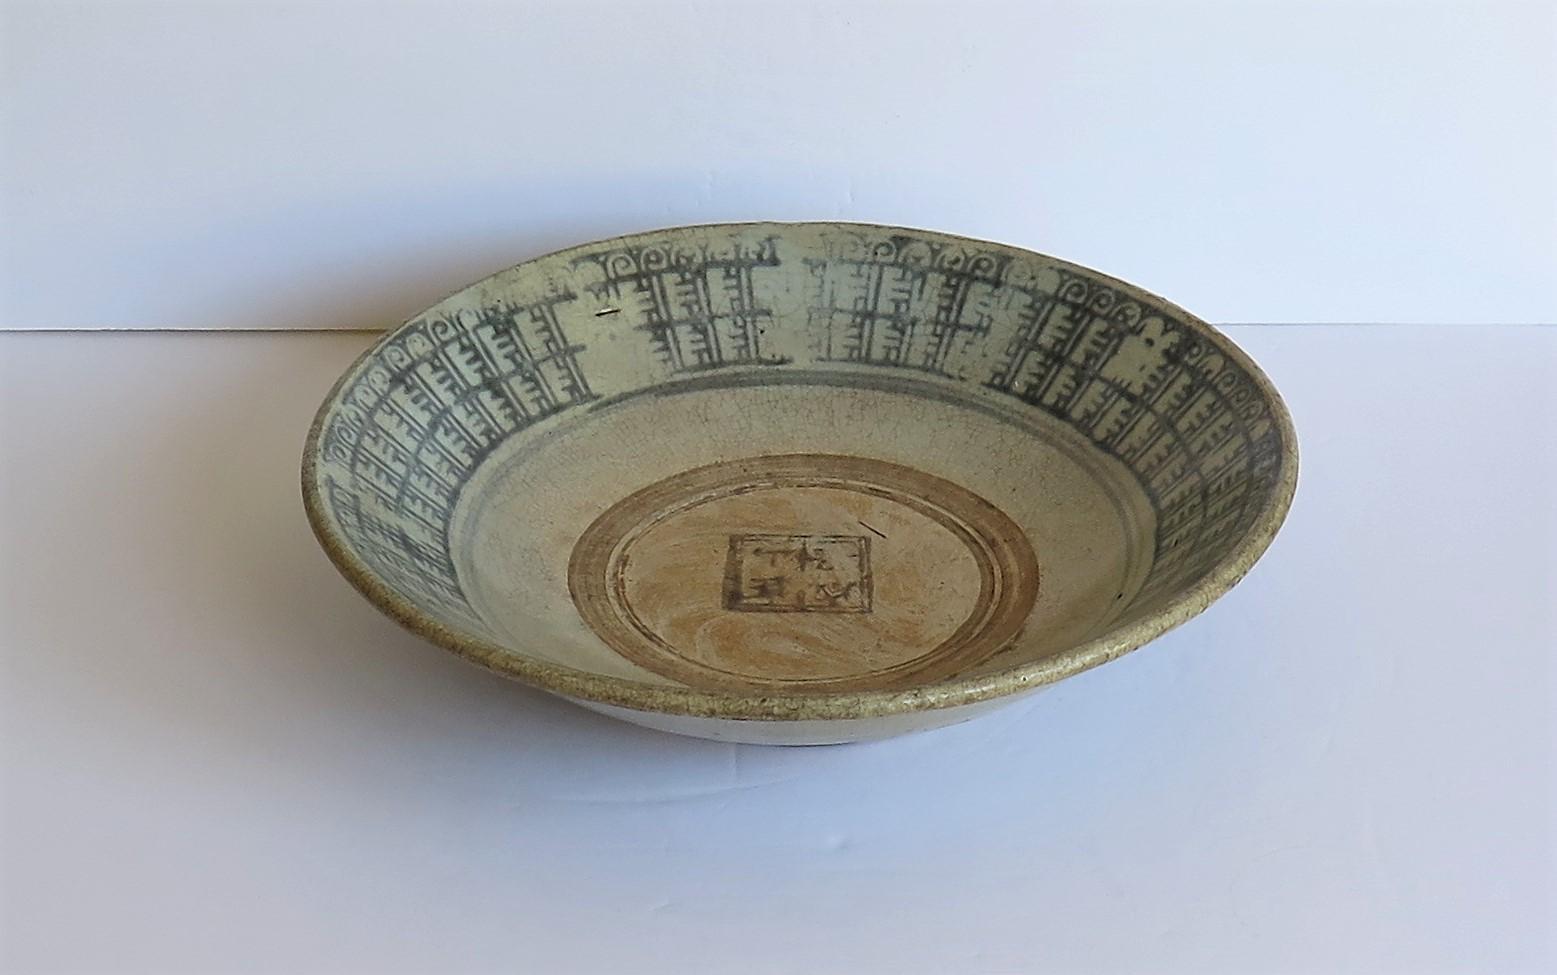 Hand-Crafted Chinese Ceramic Bounty Plate or Bowl, Ming Period 16th Century